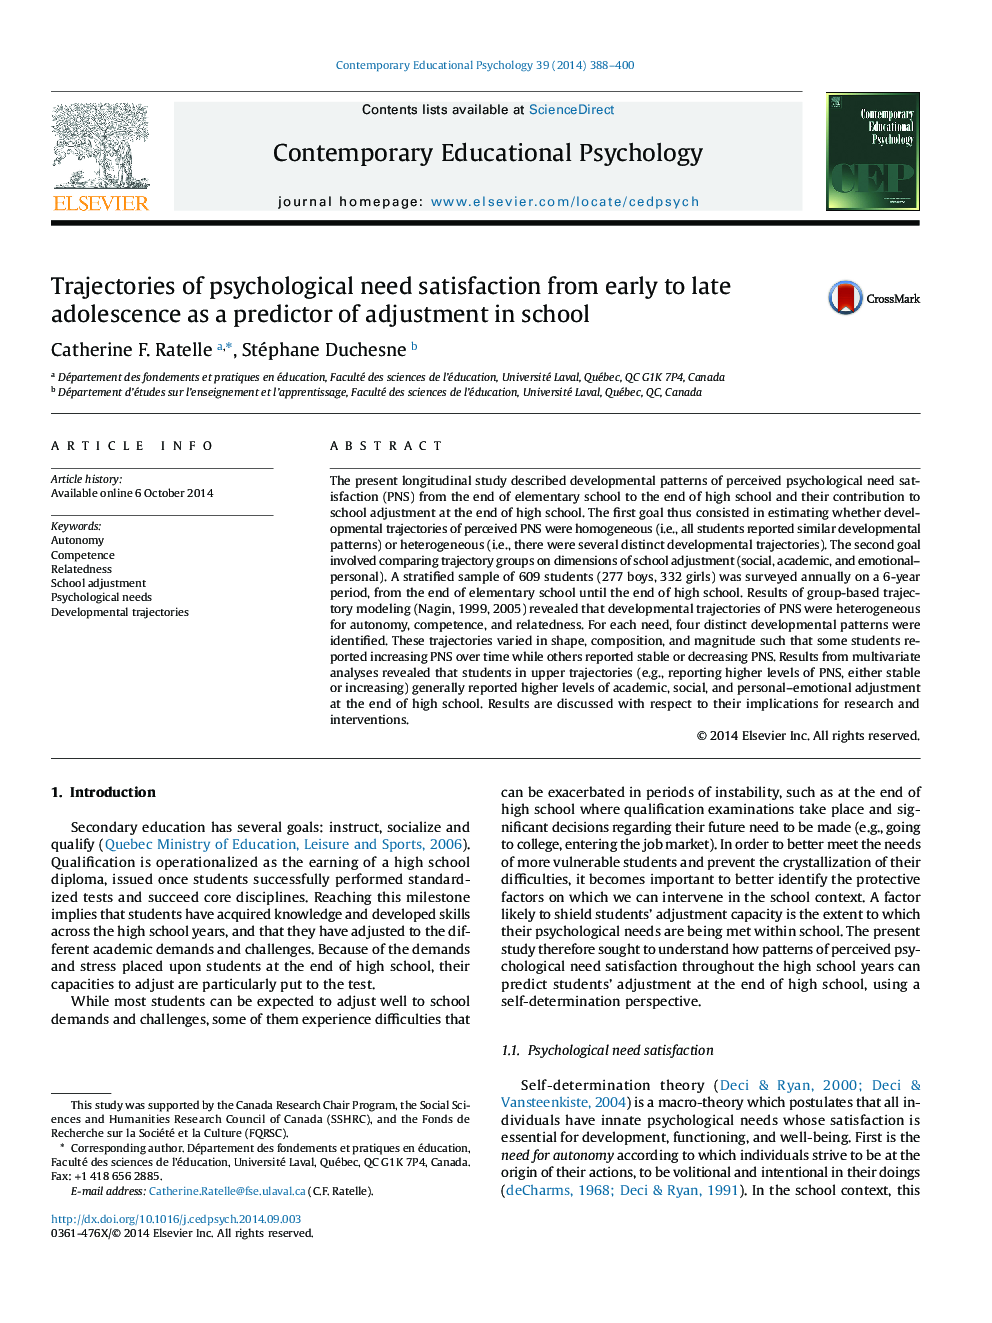 Trajectories of psychological need satisfaction from early to late adolescence as a predictor of adjustment in school 